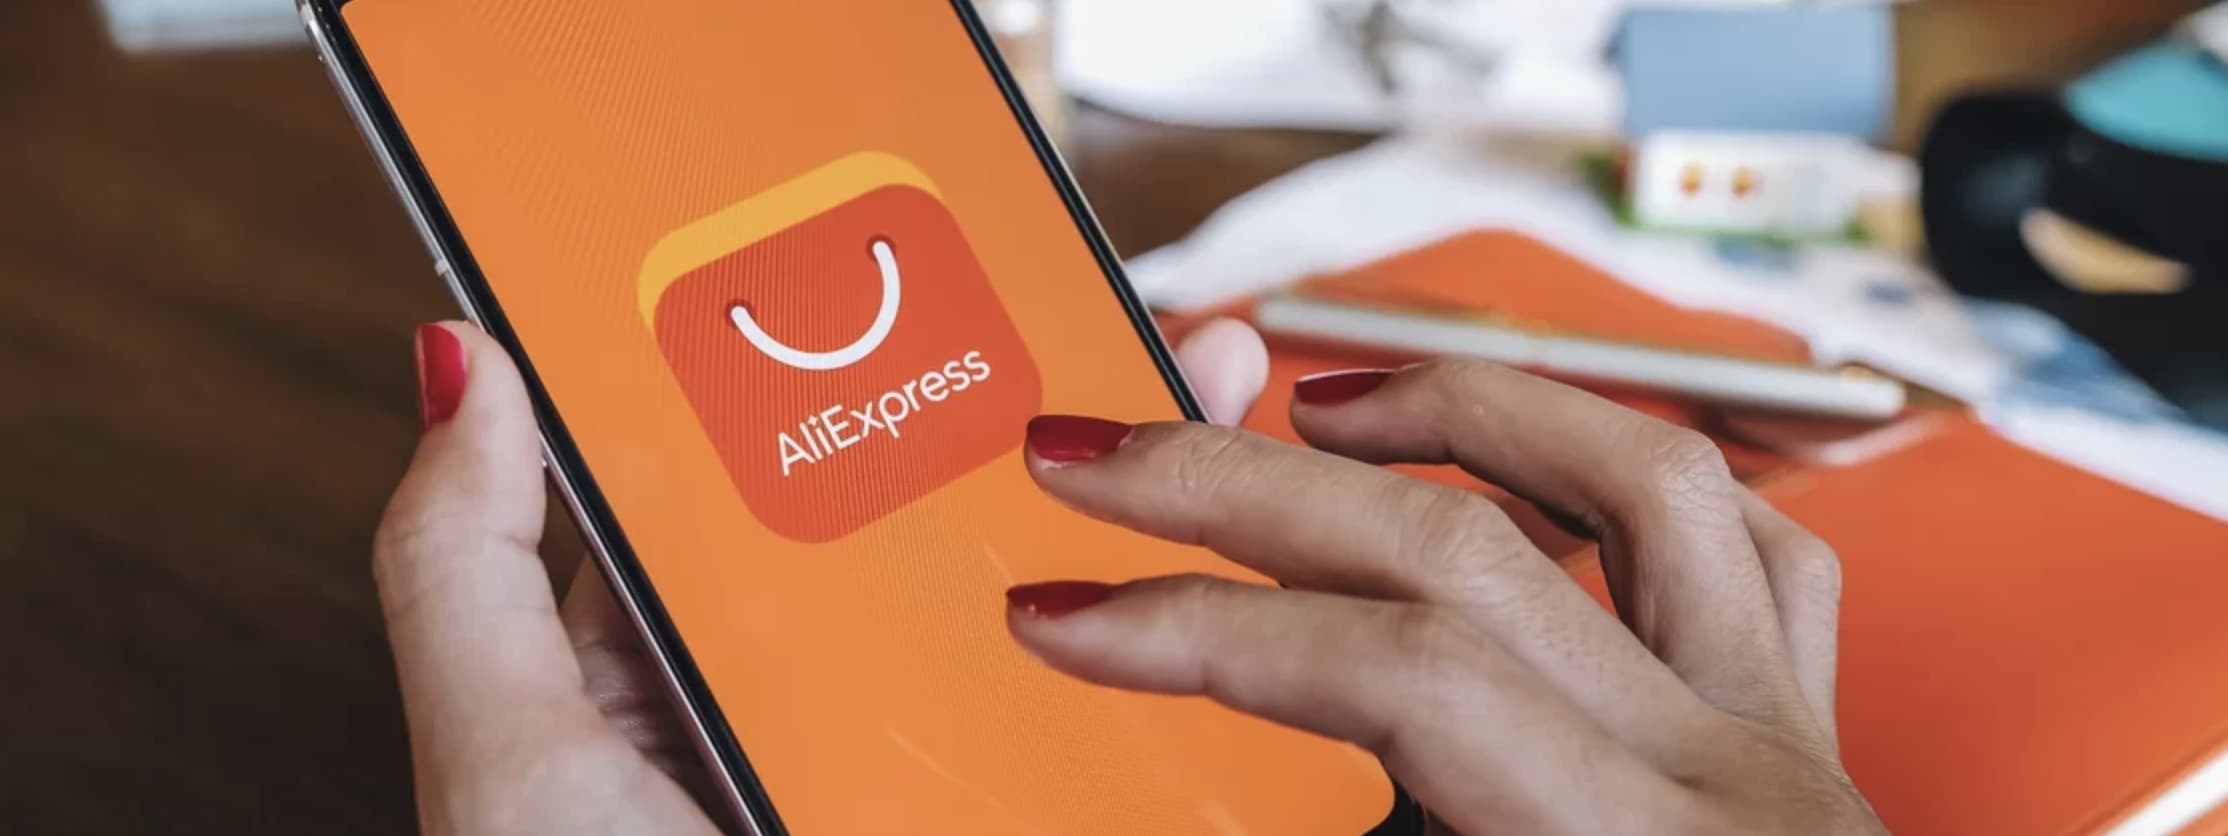 Aliexpress Coins: How to Use them?